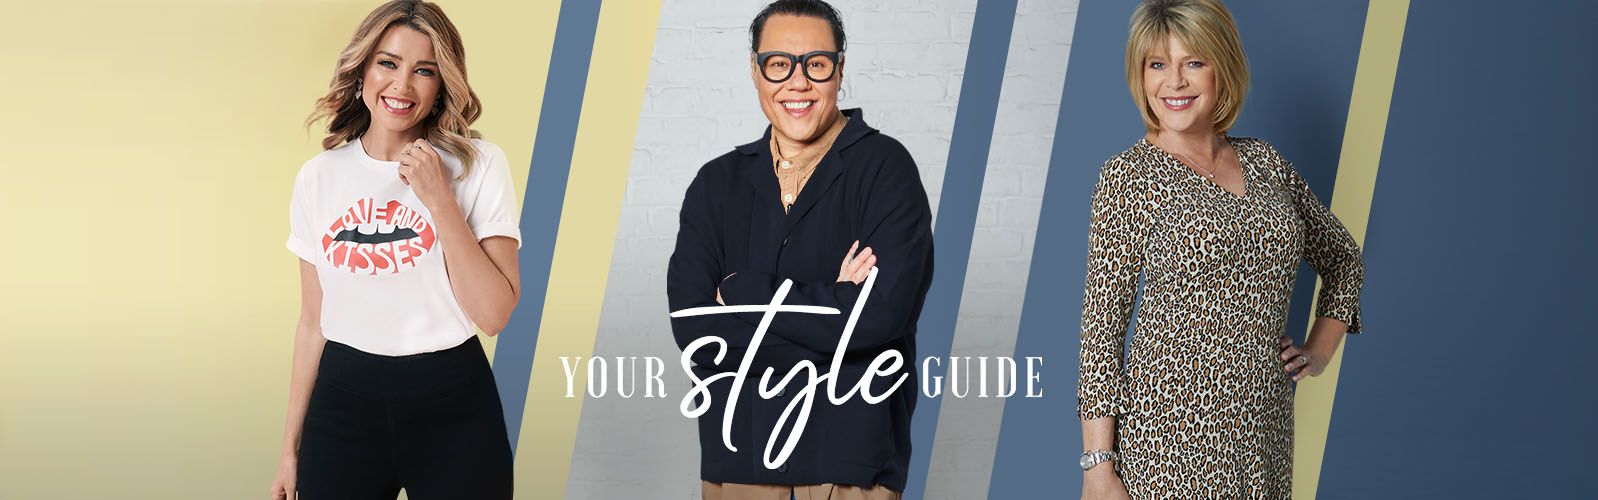 Your Style Guide - Celebrity Focus